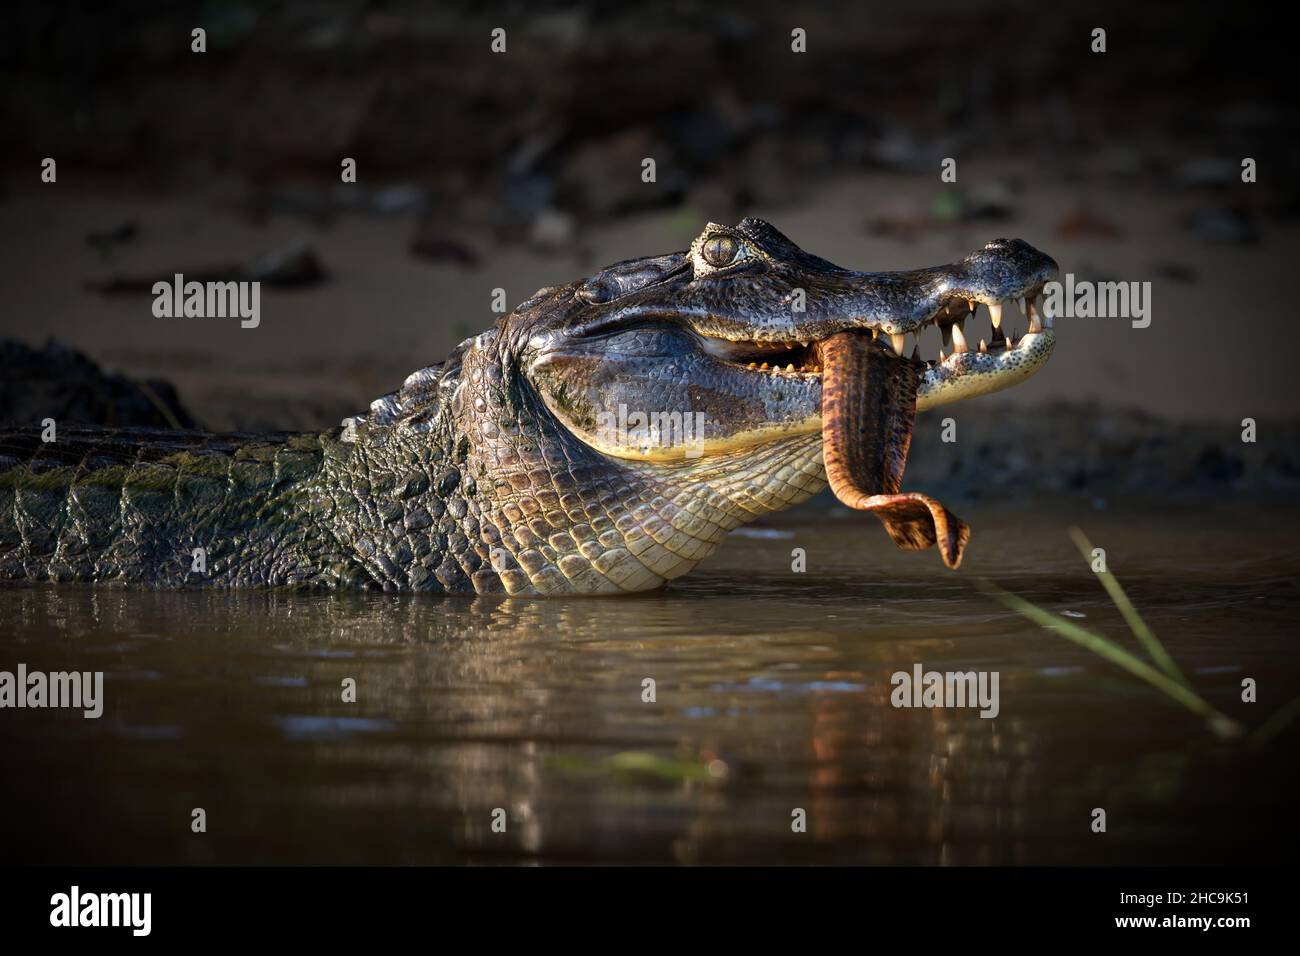 Crocodile eating fish outdoors in Pantanal, Brazil during daylight Stock Photo